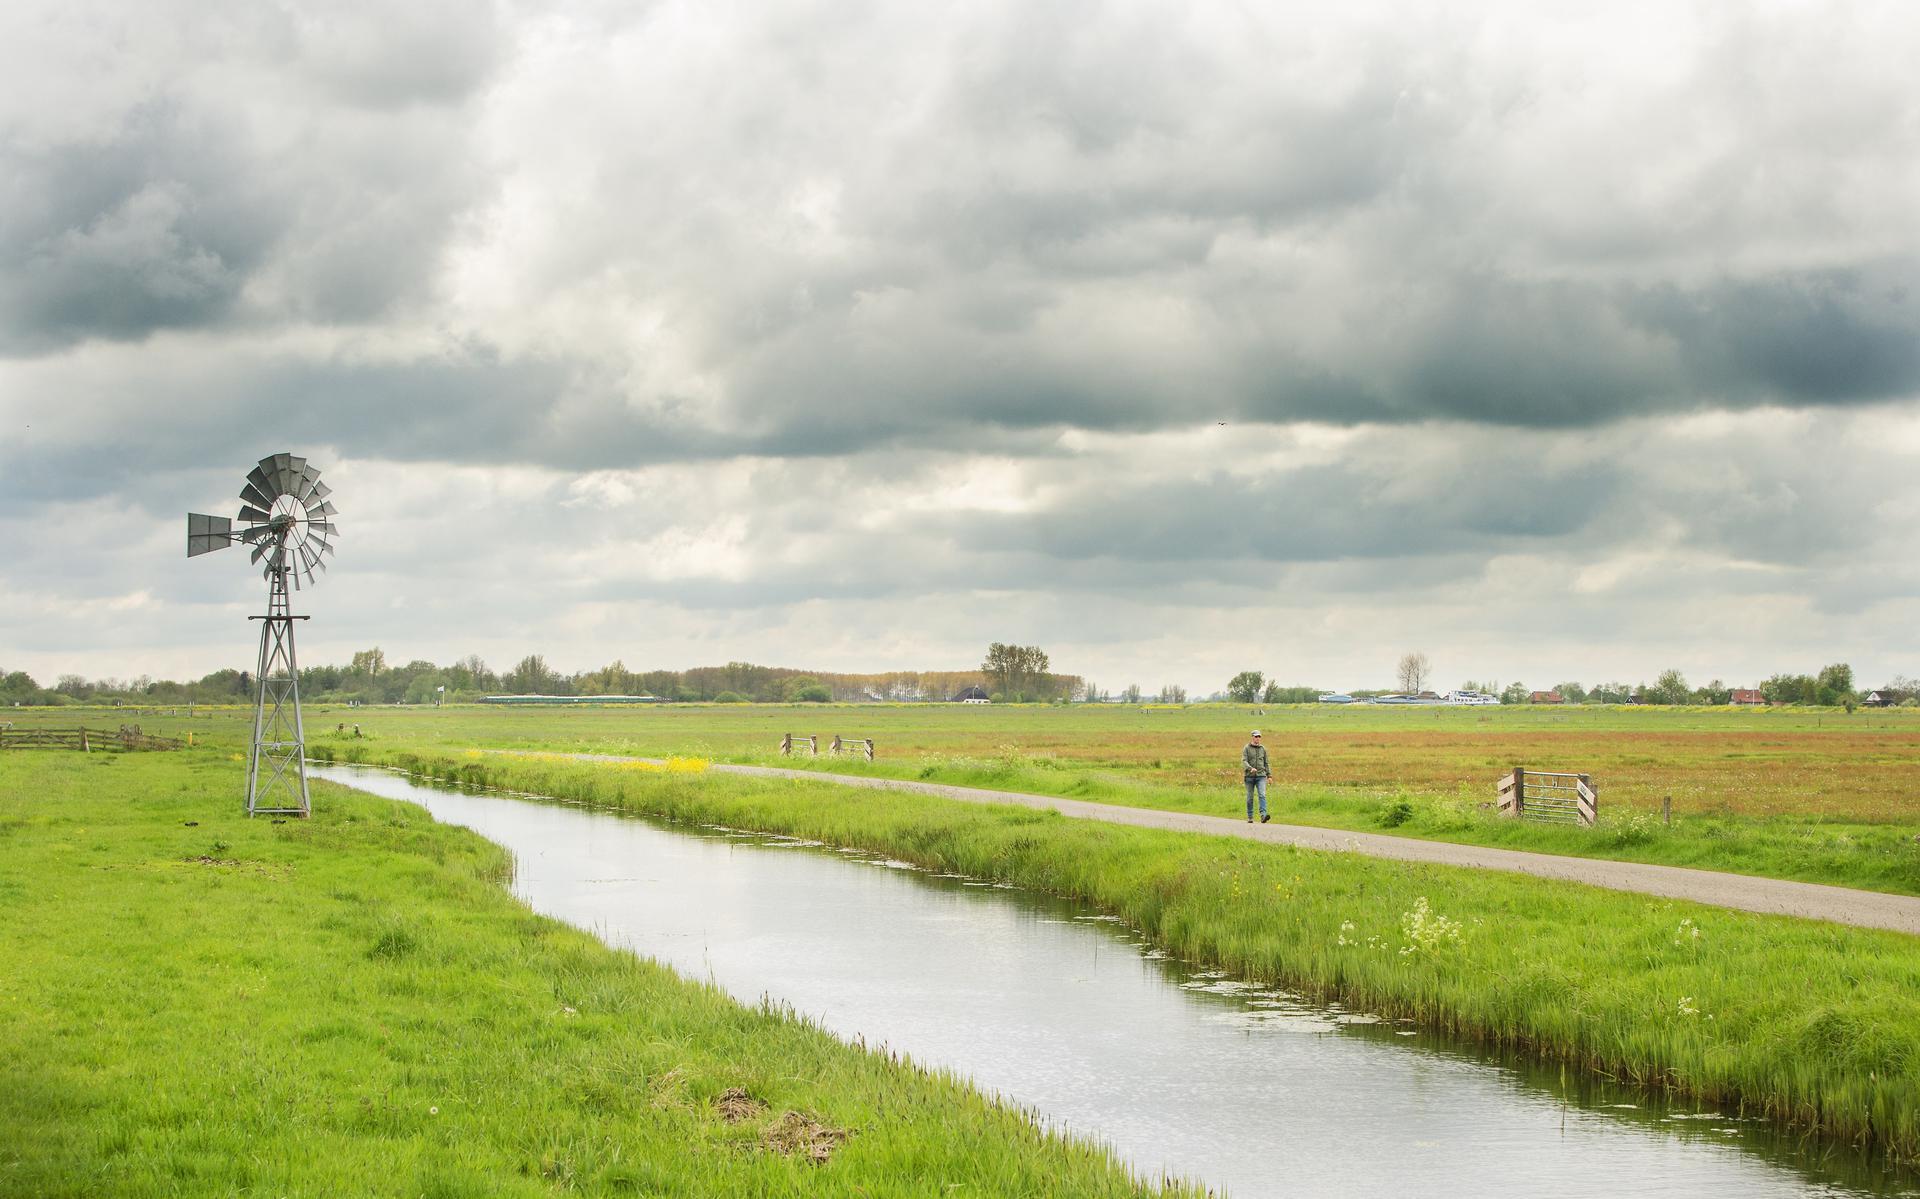 The Weideleven Foundation polder near Earnewâld, where farmland is managed to make it suitable for grassland birds, insects and soil life.  Wetterskip Fryslân should show more ambition from the board of directors in promoting biodiversity. 